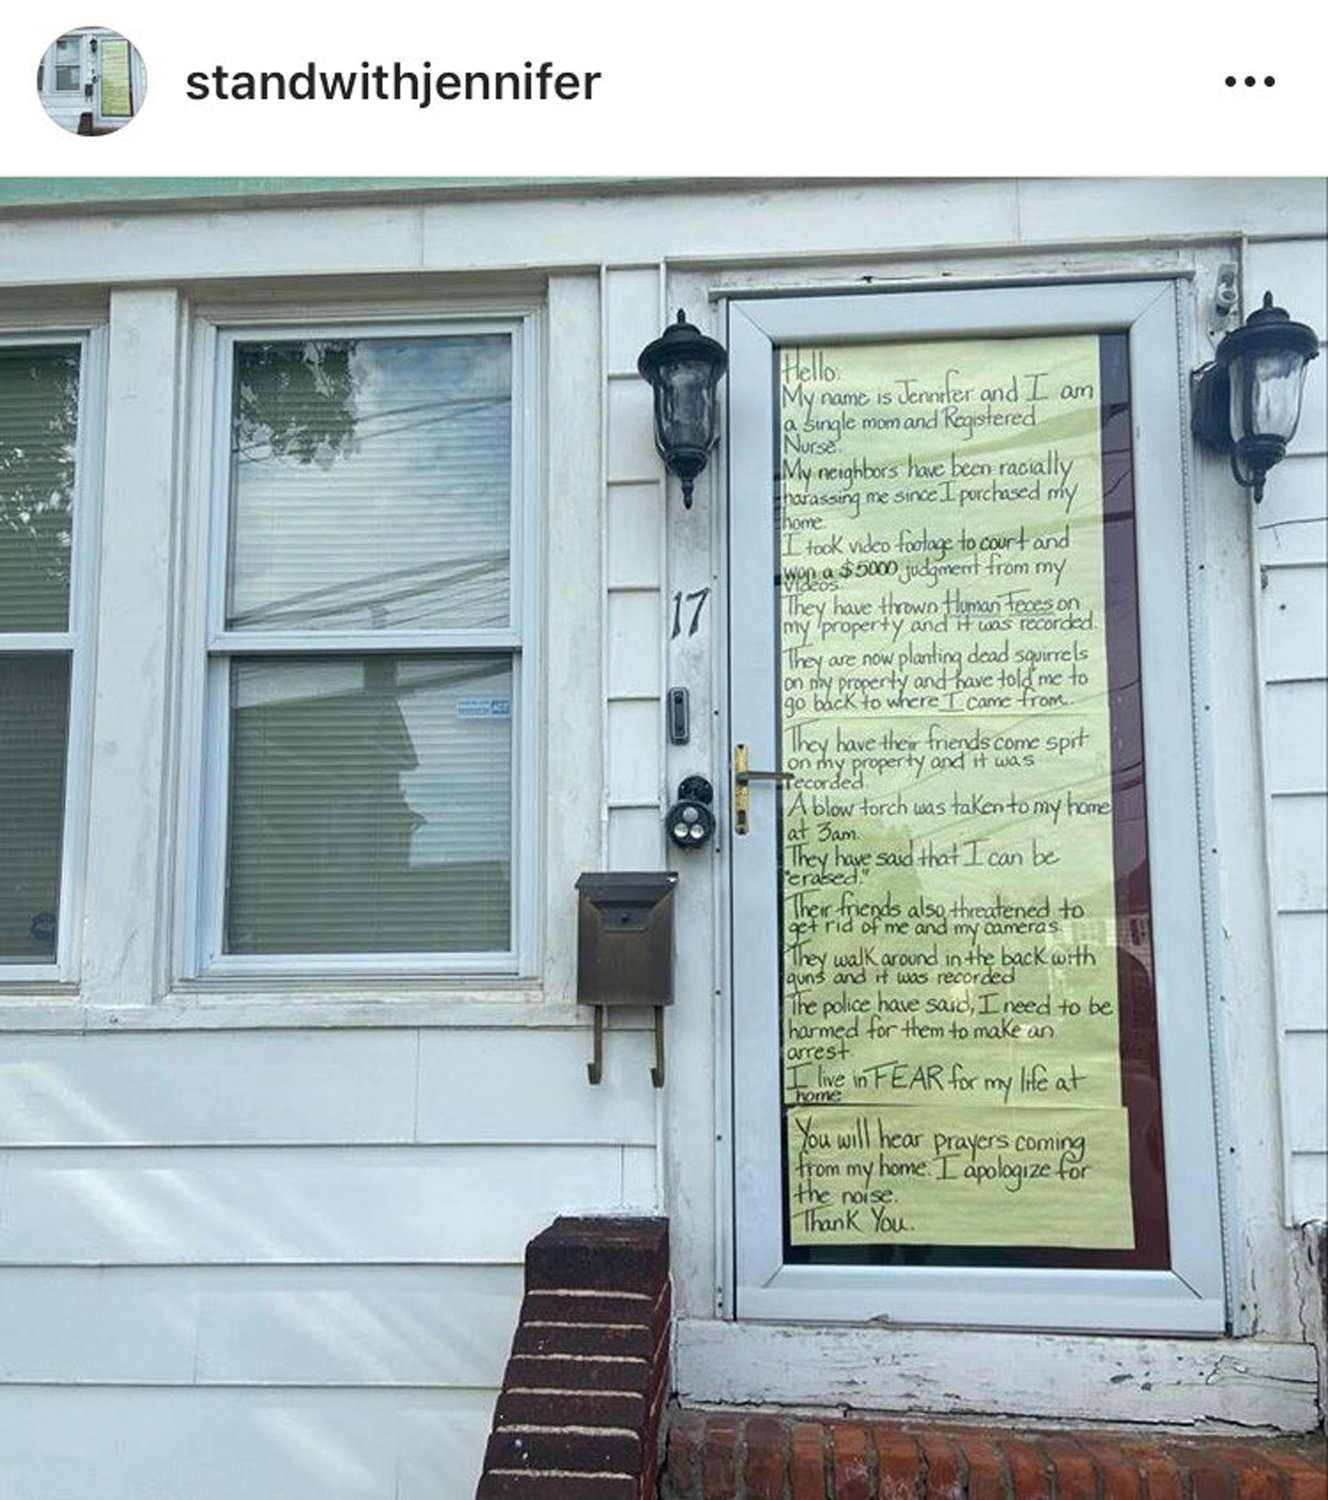 McLeggan's latest incident with the neighbors involving a dead squirrel she believes they placed on her lawn prompted her to place a sign on her doorway outlining her encounters with them. A photo of it has been shared widely on social media.